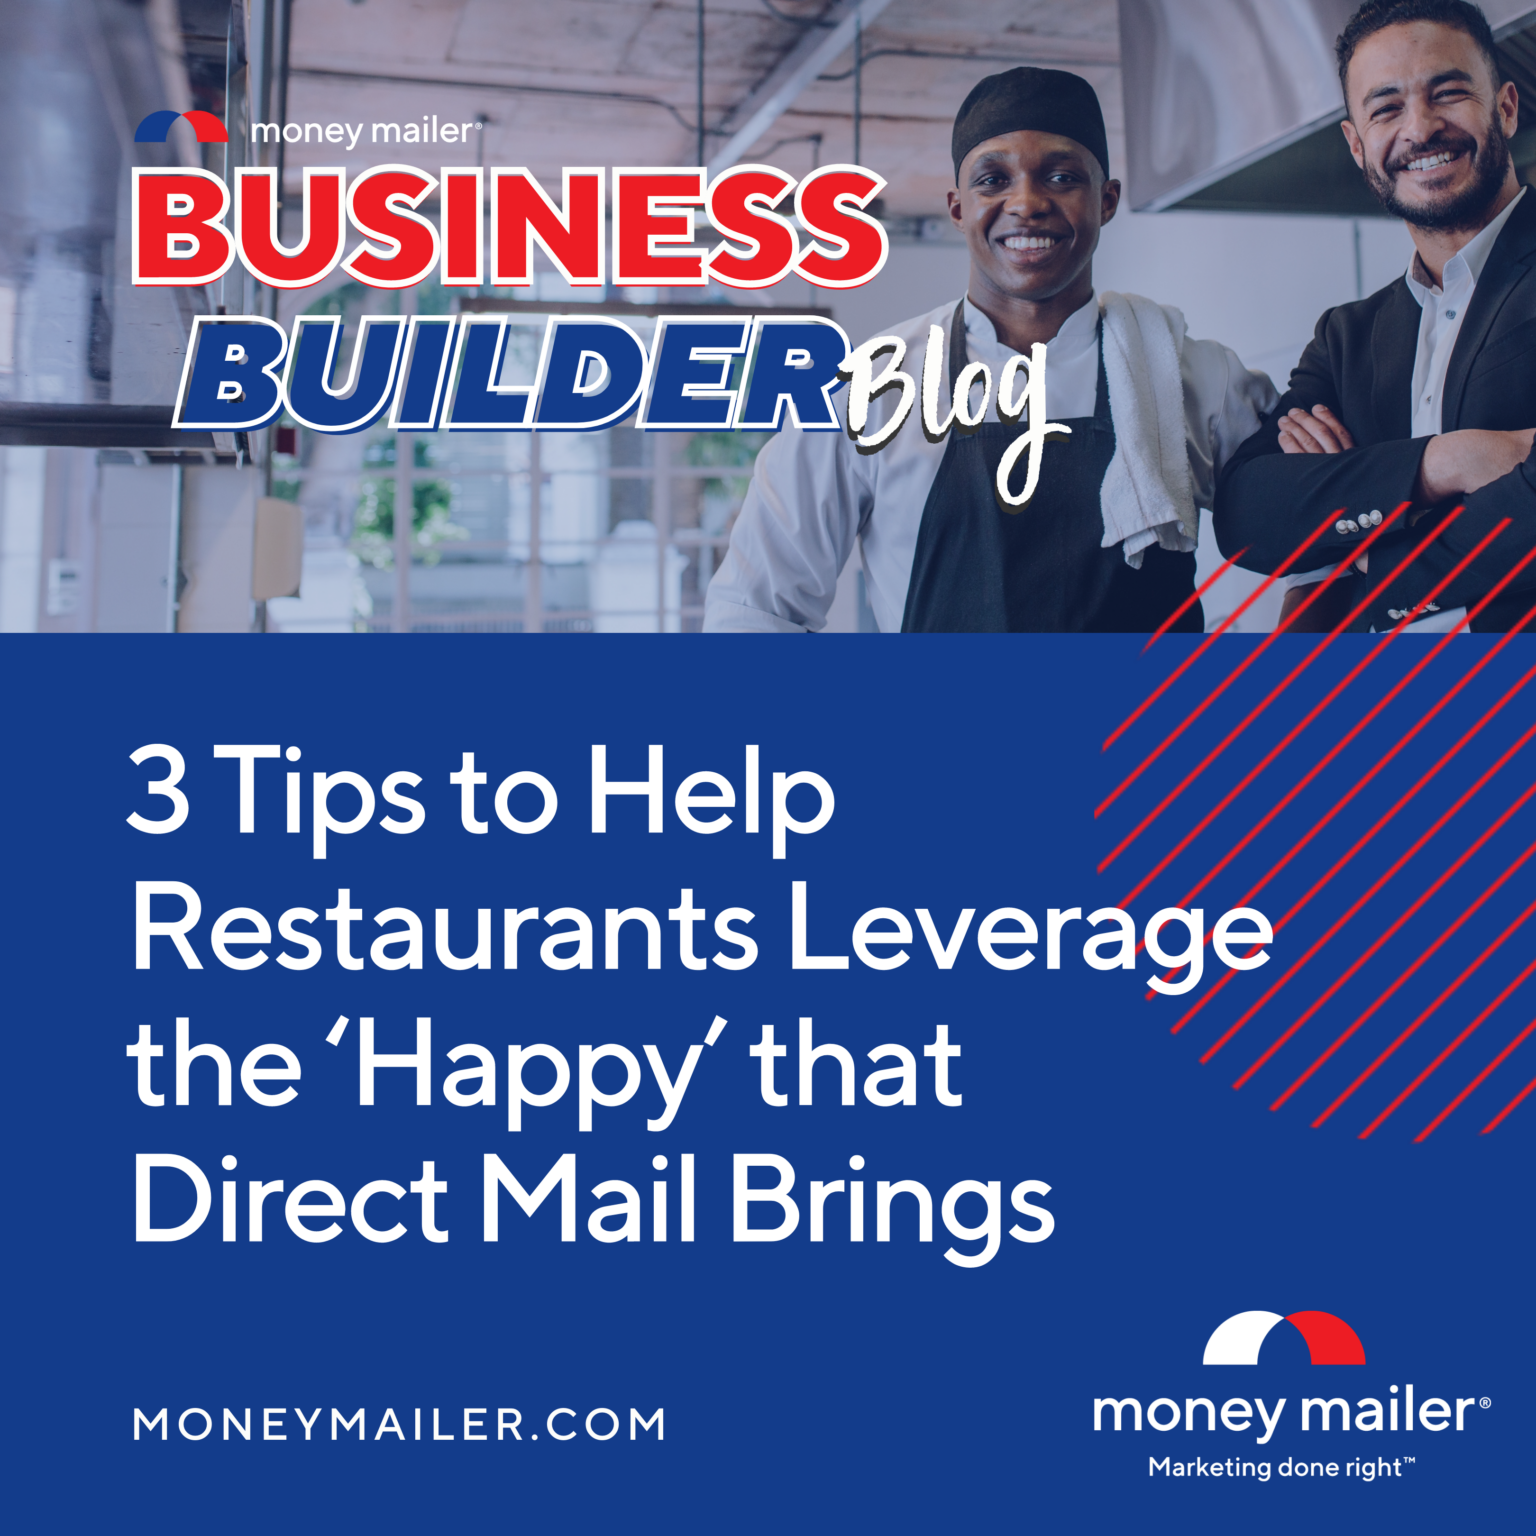 3 Tips to Help Restaurants Leverage the ‘Happy’ that Direct Mail Brings